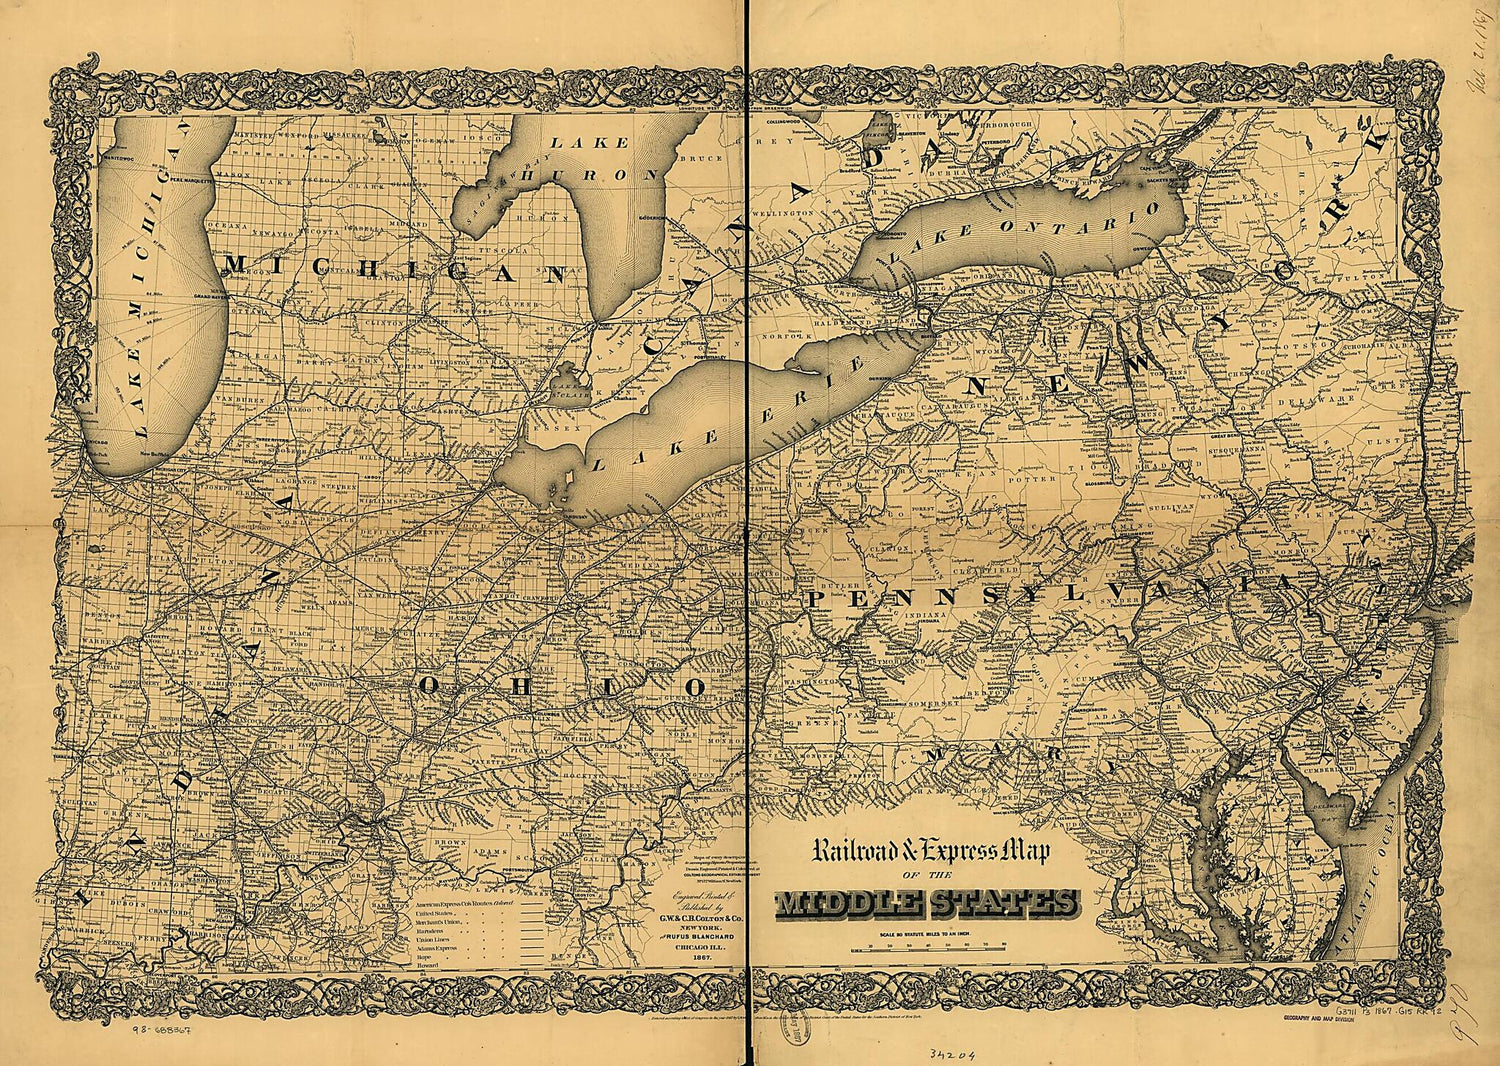 This old map of Railroad &amp; Express Map of the Middle States from 1867 was created by  G.W. &amp; C.B. Colton &amp; Co in 1867